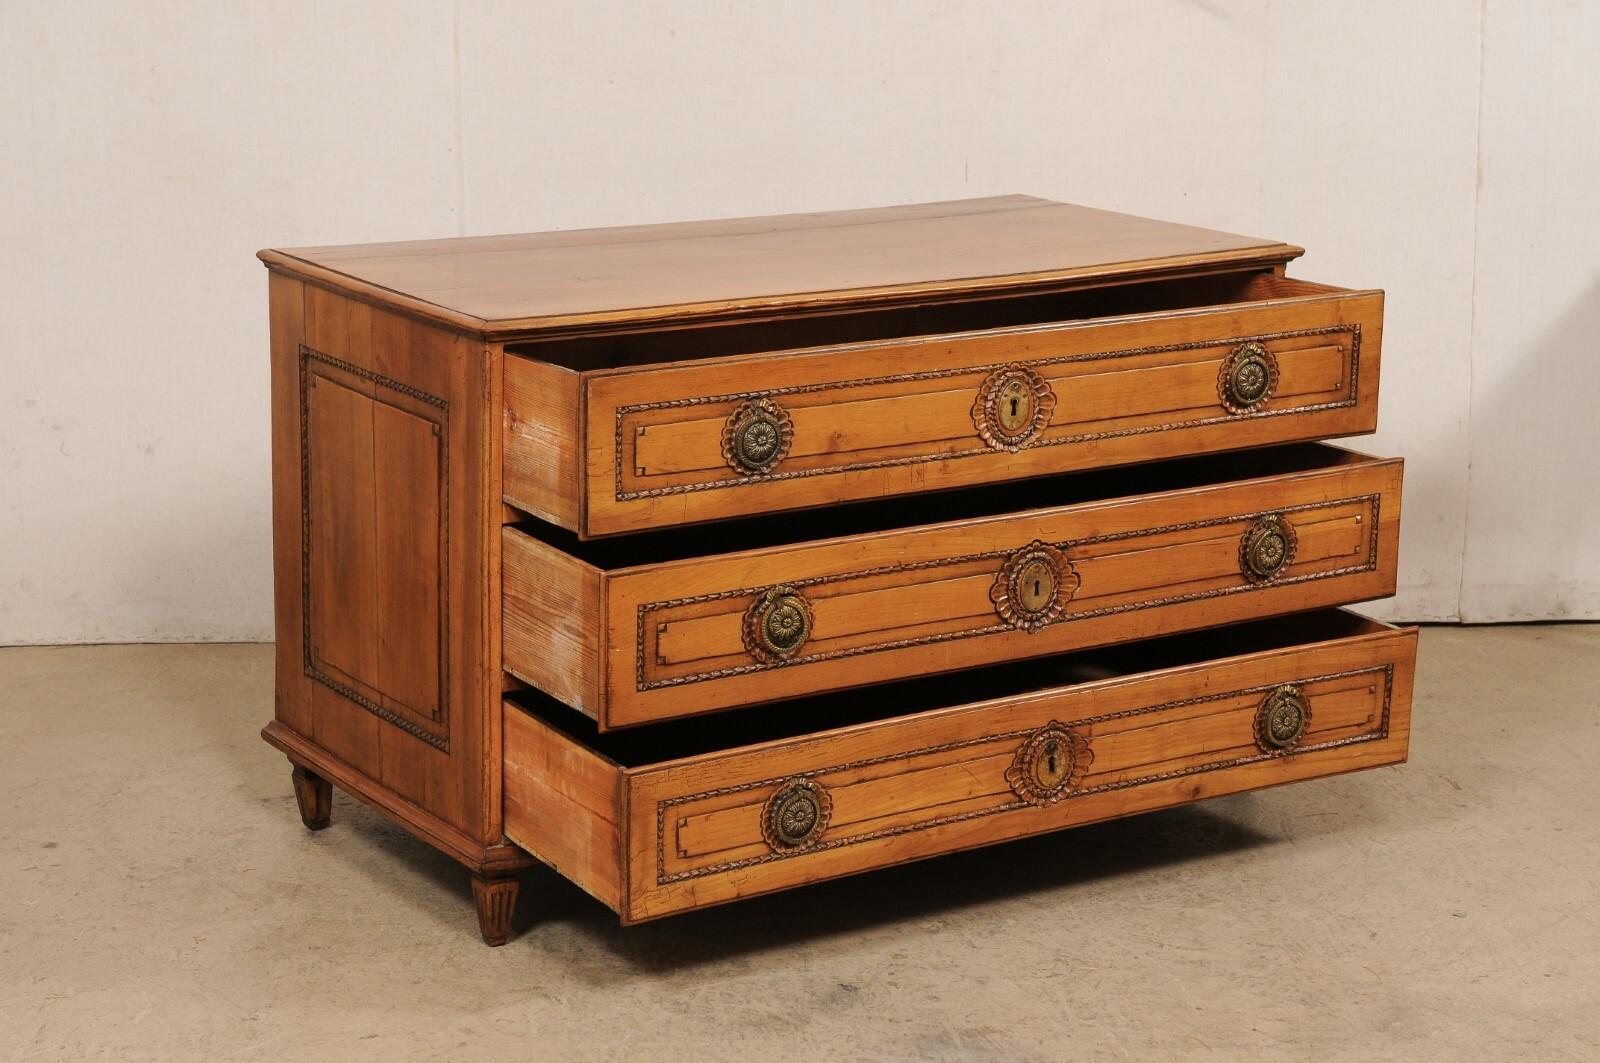 A French wooden three-drawer carved-wood commode from the 18th century. This antique chest from France has a 4.5 foot long rectangular-shaped top, over case which houses three full-sized and graduated drawers. The skirt is straight and clean, and